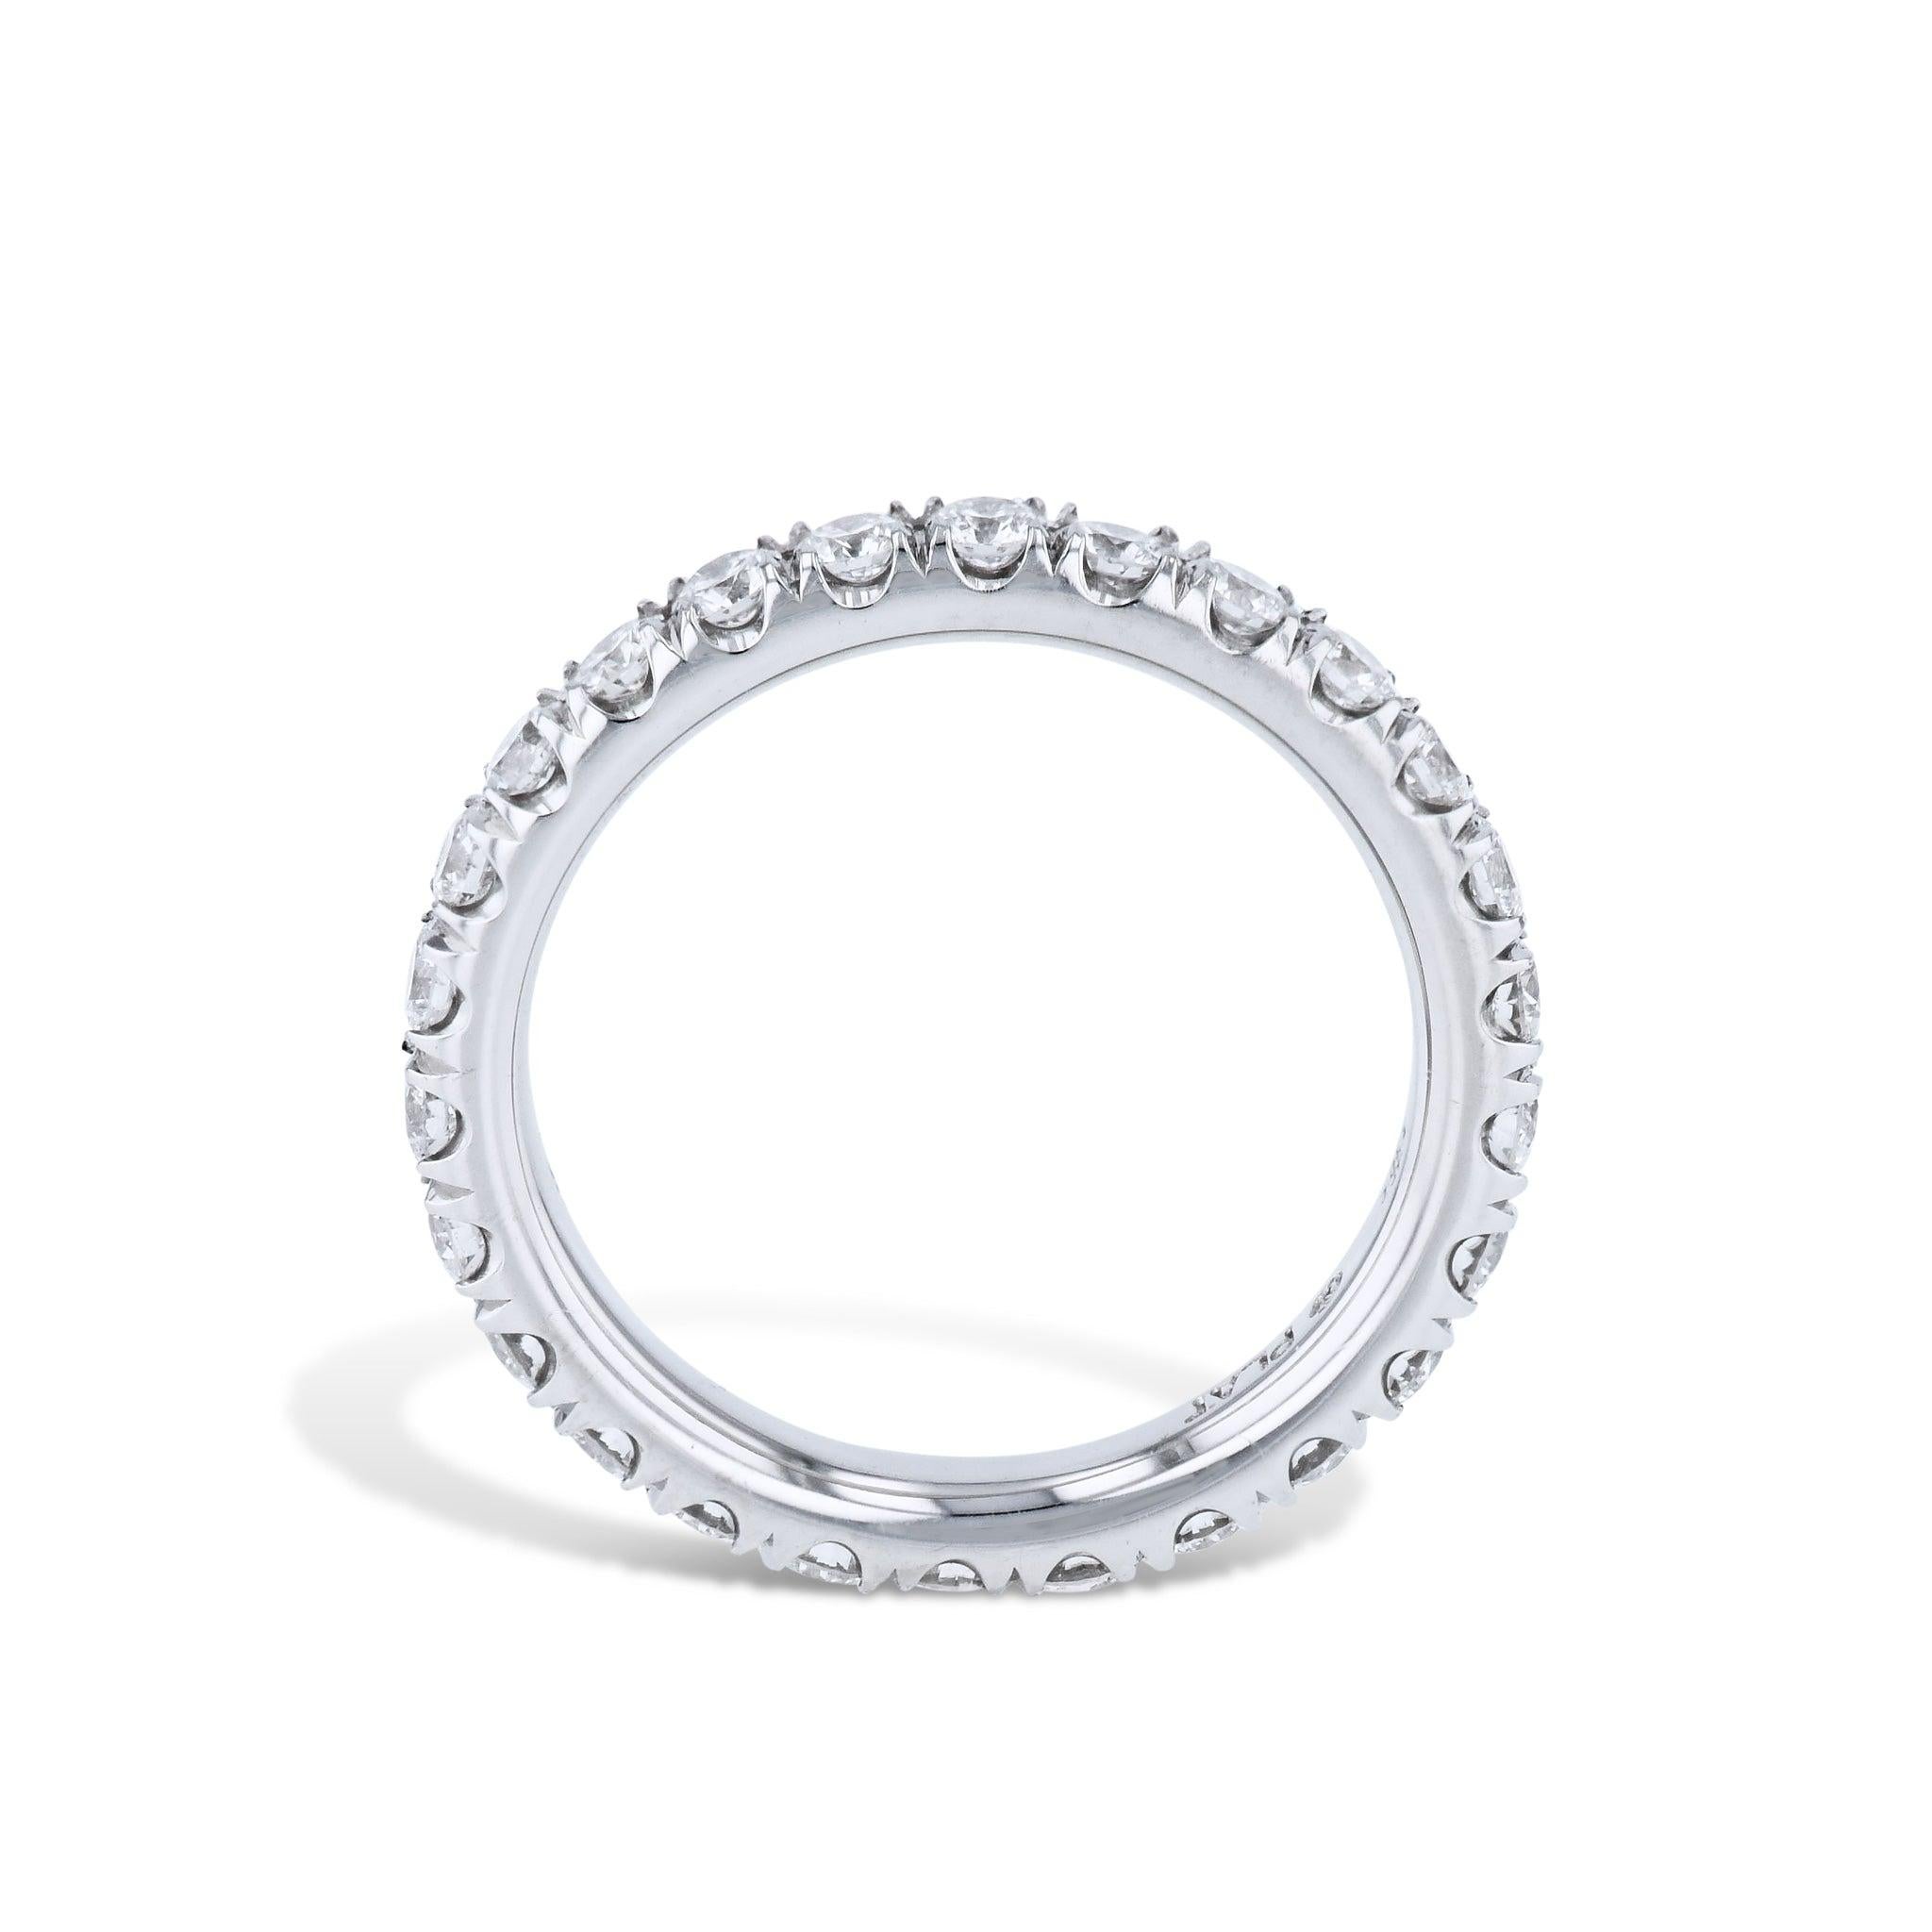 The Round Diamond Platinum Eternity Band Ring is a stunning must-have. Crafted with 27 brilliant cut diamonds, this gorgeous eternity band sparkles and shimmers. The 3mm U-Set diamonds create a mesmerizing effect that will draw all eyes. Expertly